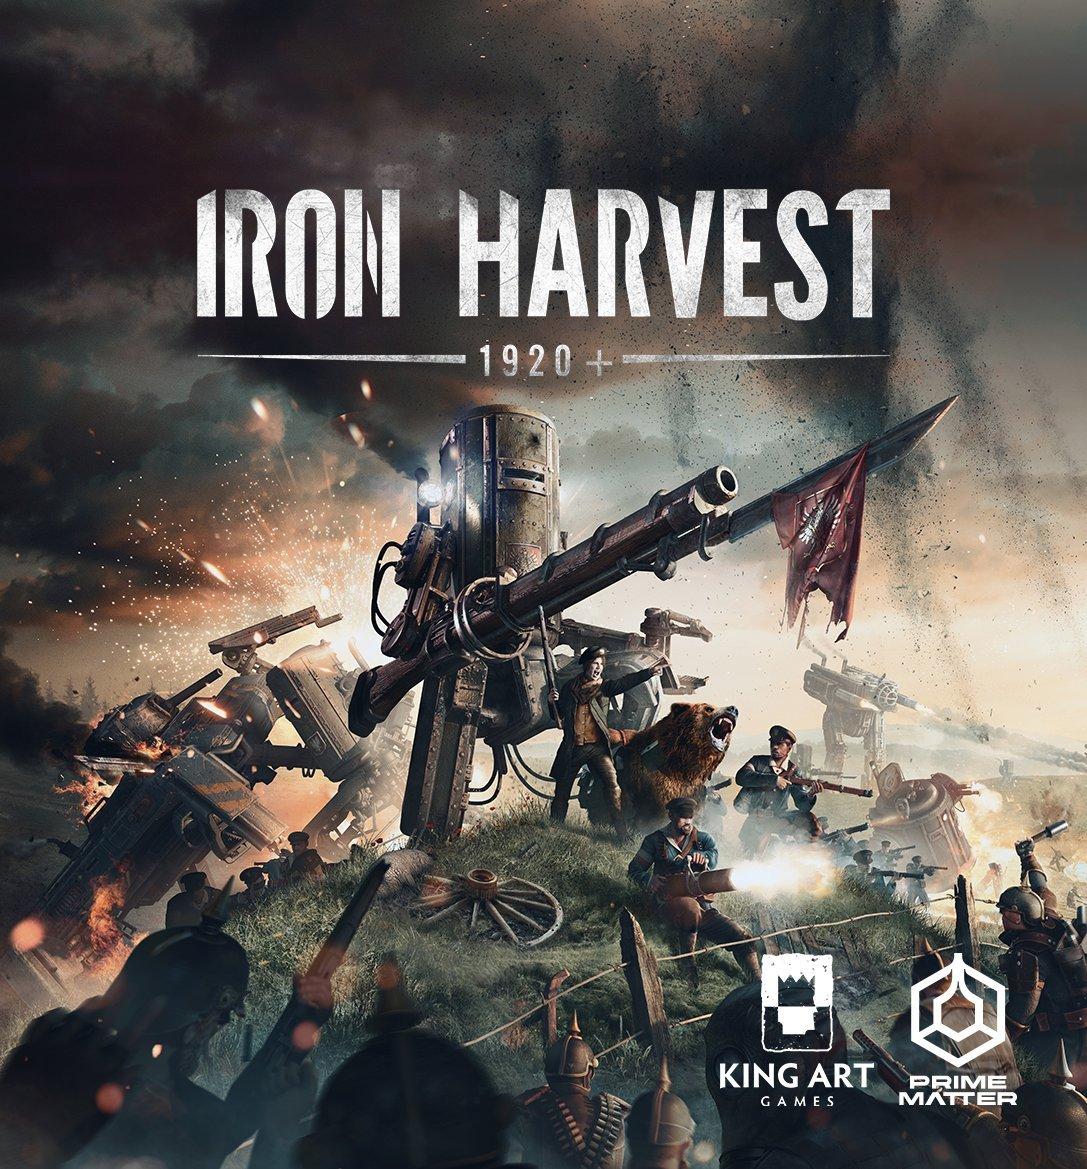 Iron Harvest: Complete Edition - PS5, PlayStation 5